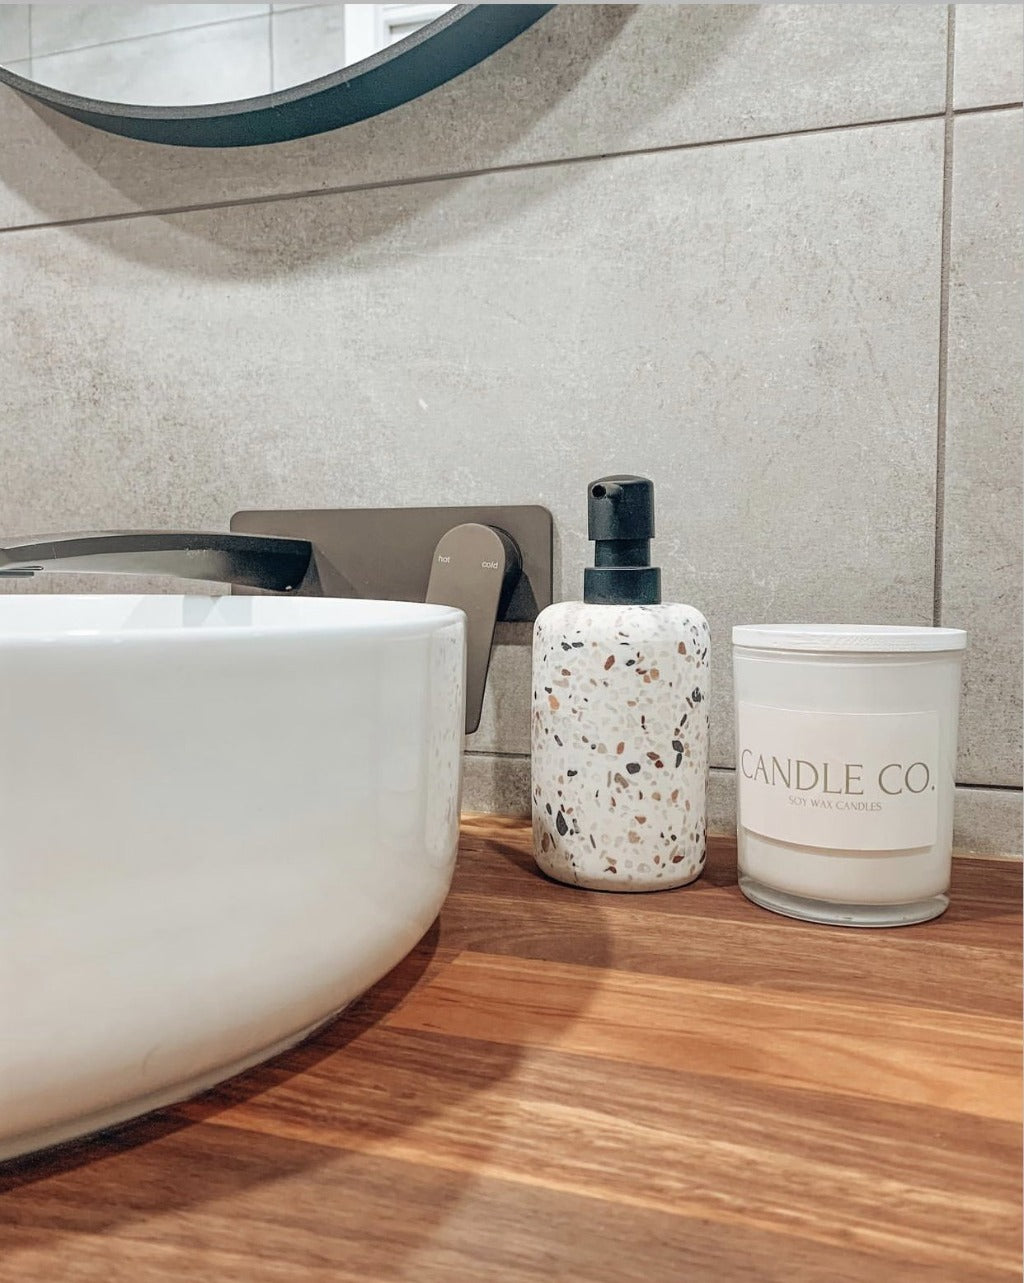 Venice White 185ml Soap Dispenser - Salt&amp;Pepper - Made from durable resin in a delightfully sleek shape - features a matte finish with an on-trend terrazzo inlay |Bliss Gifts &amp; Homewares - Unit 8, 259 Princes Hwy Ulladulla - Shop Online &amp; In store - 0427795959, 44541523 - Australia wide shipping